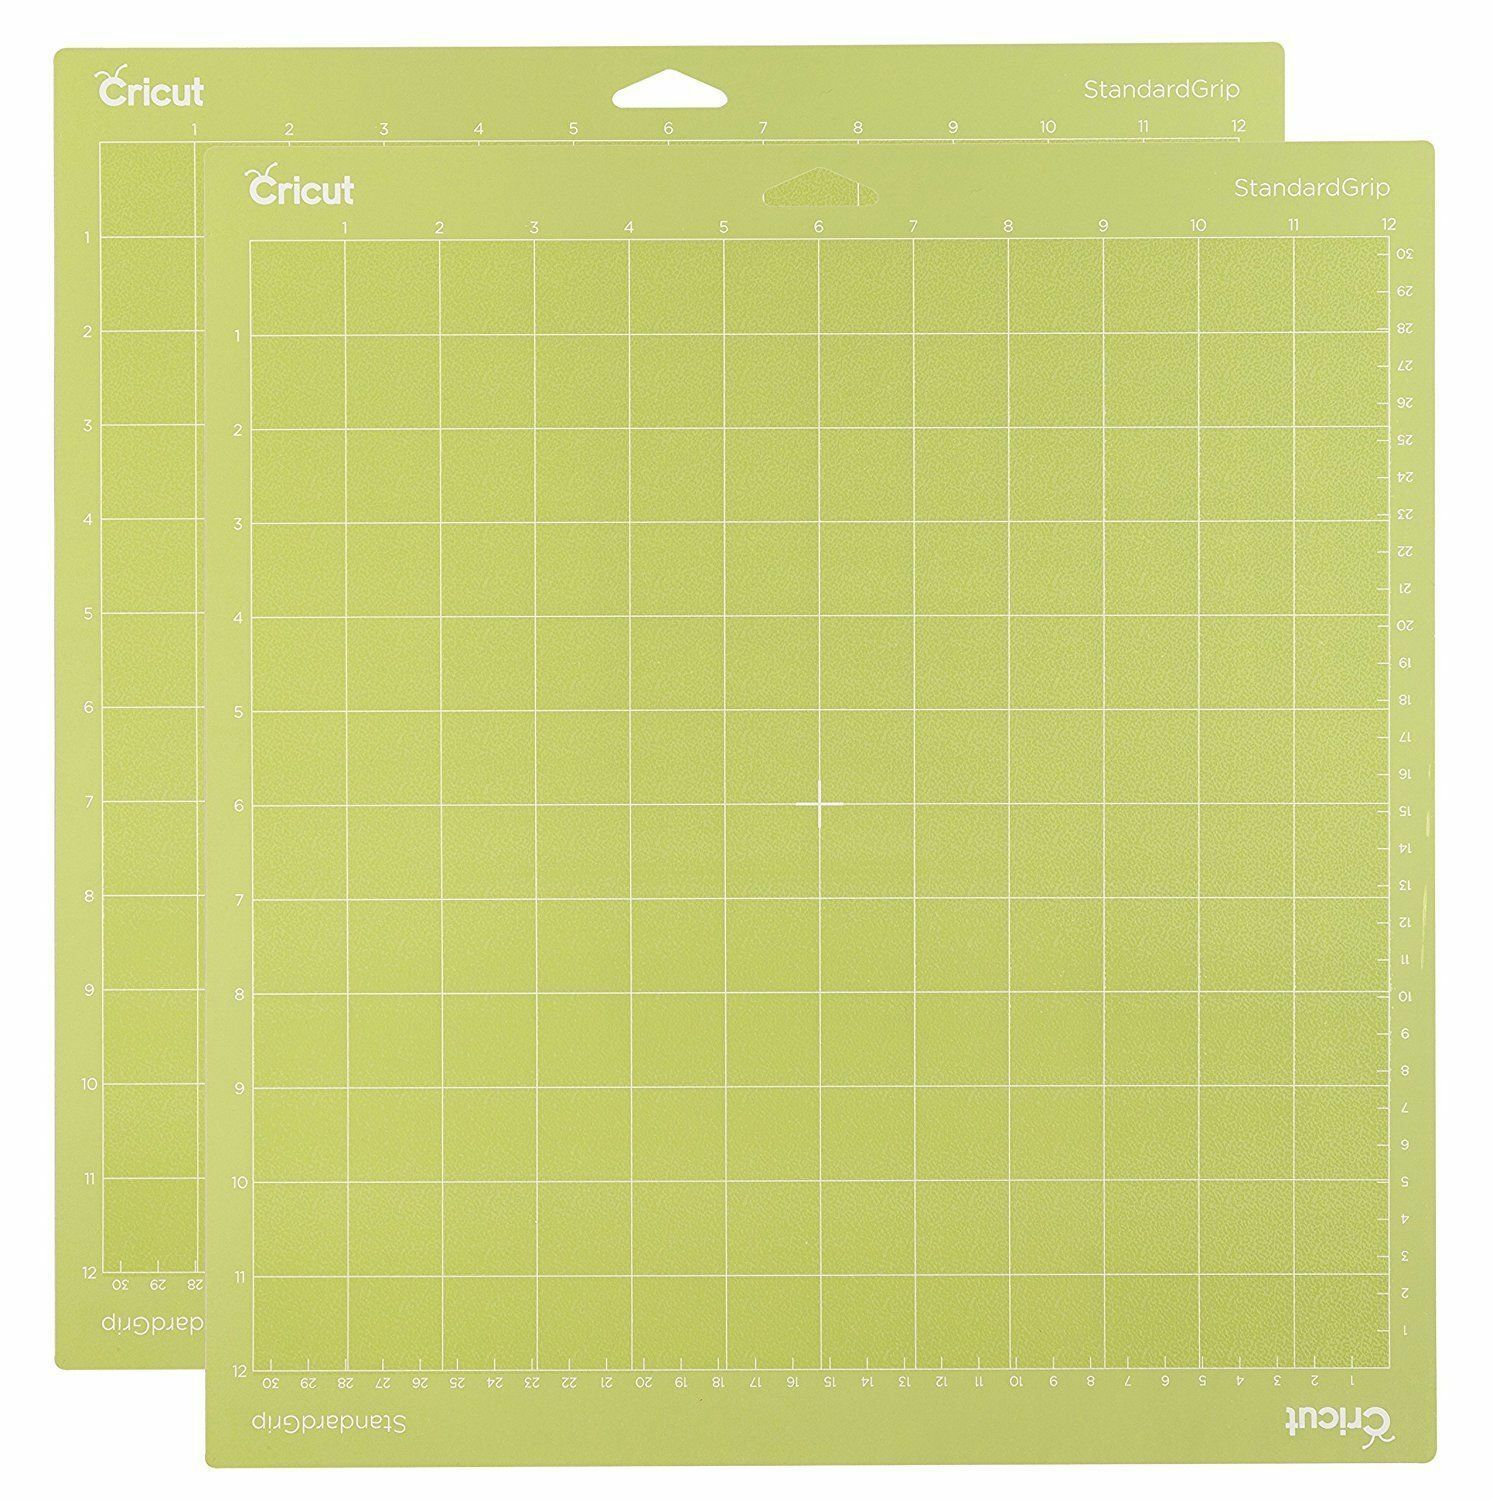 Cricut Tools Accessories Standard Grip Adhesive Cutting Mat 12 By 12 Set Of 2